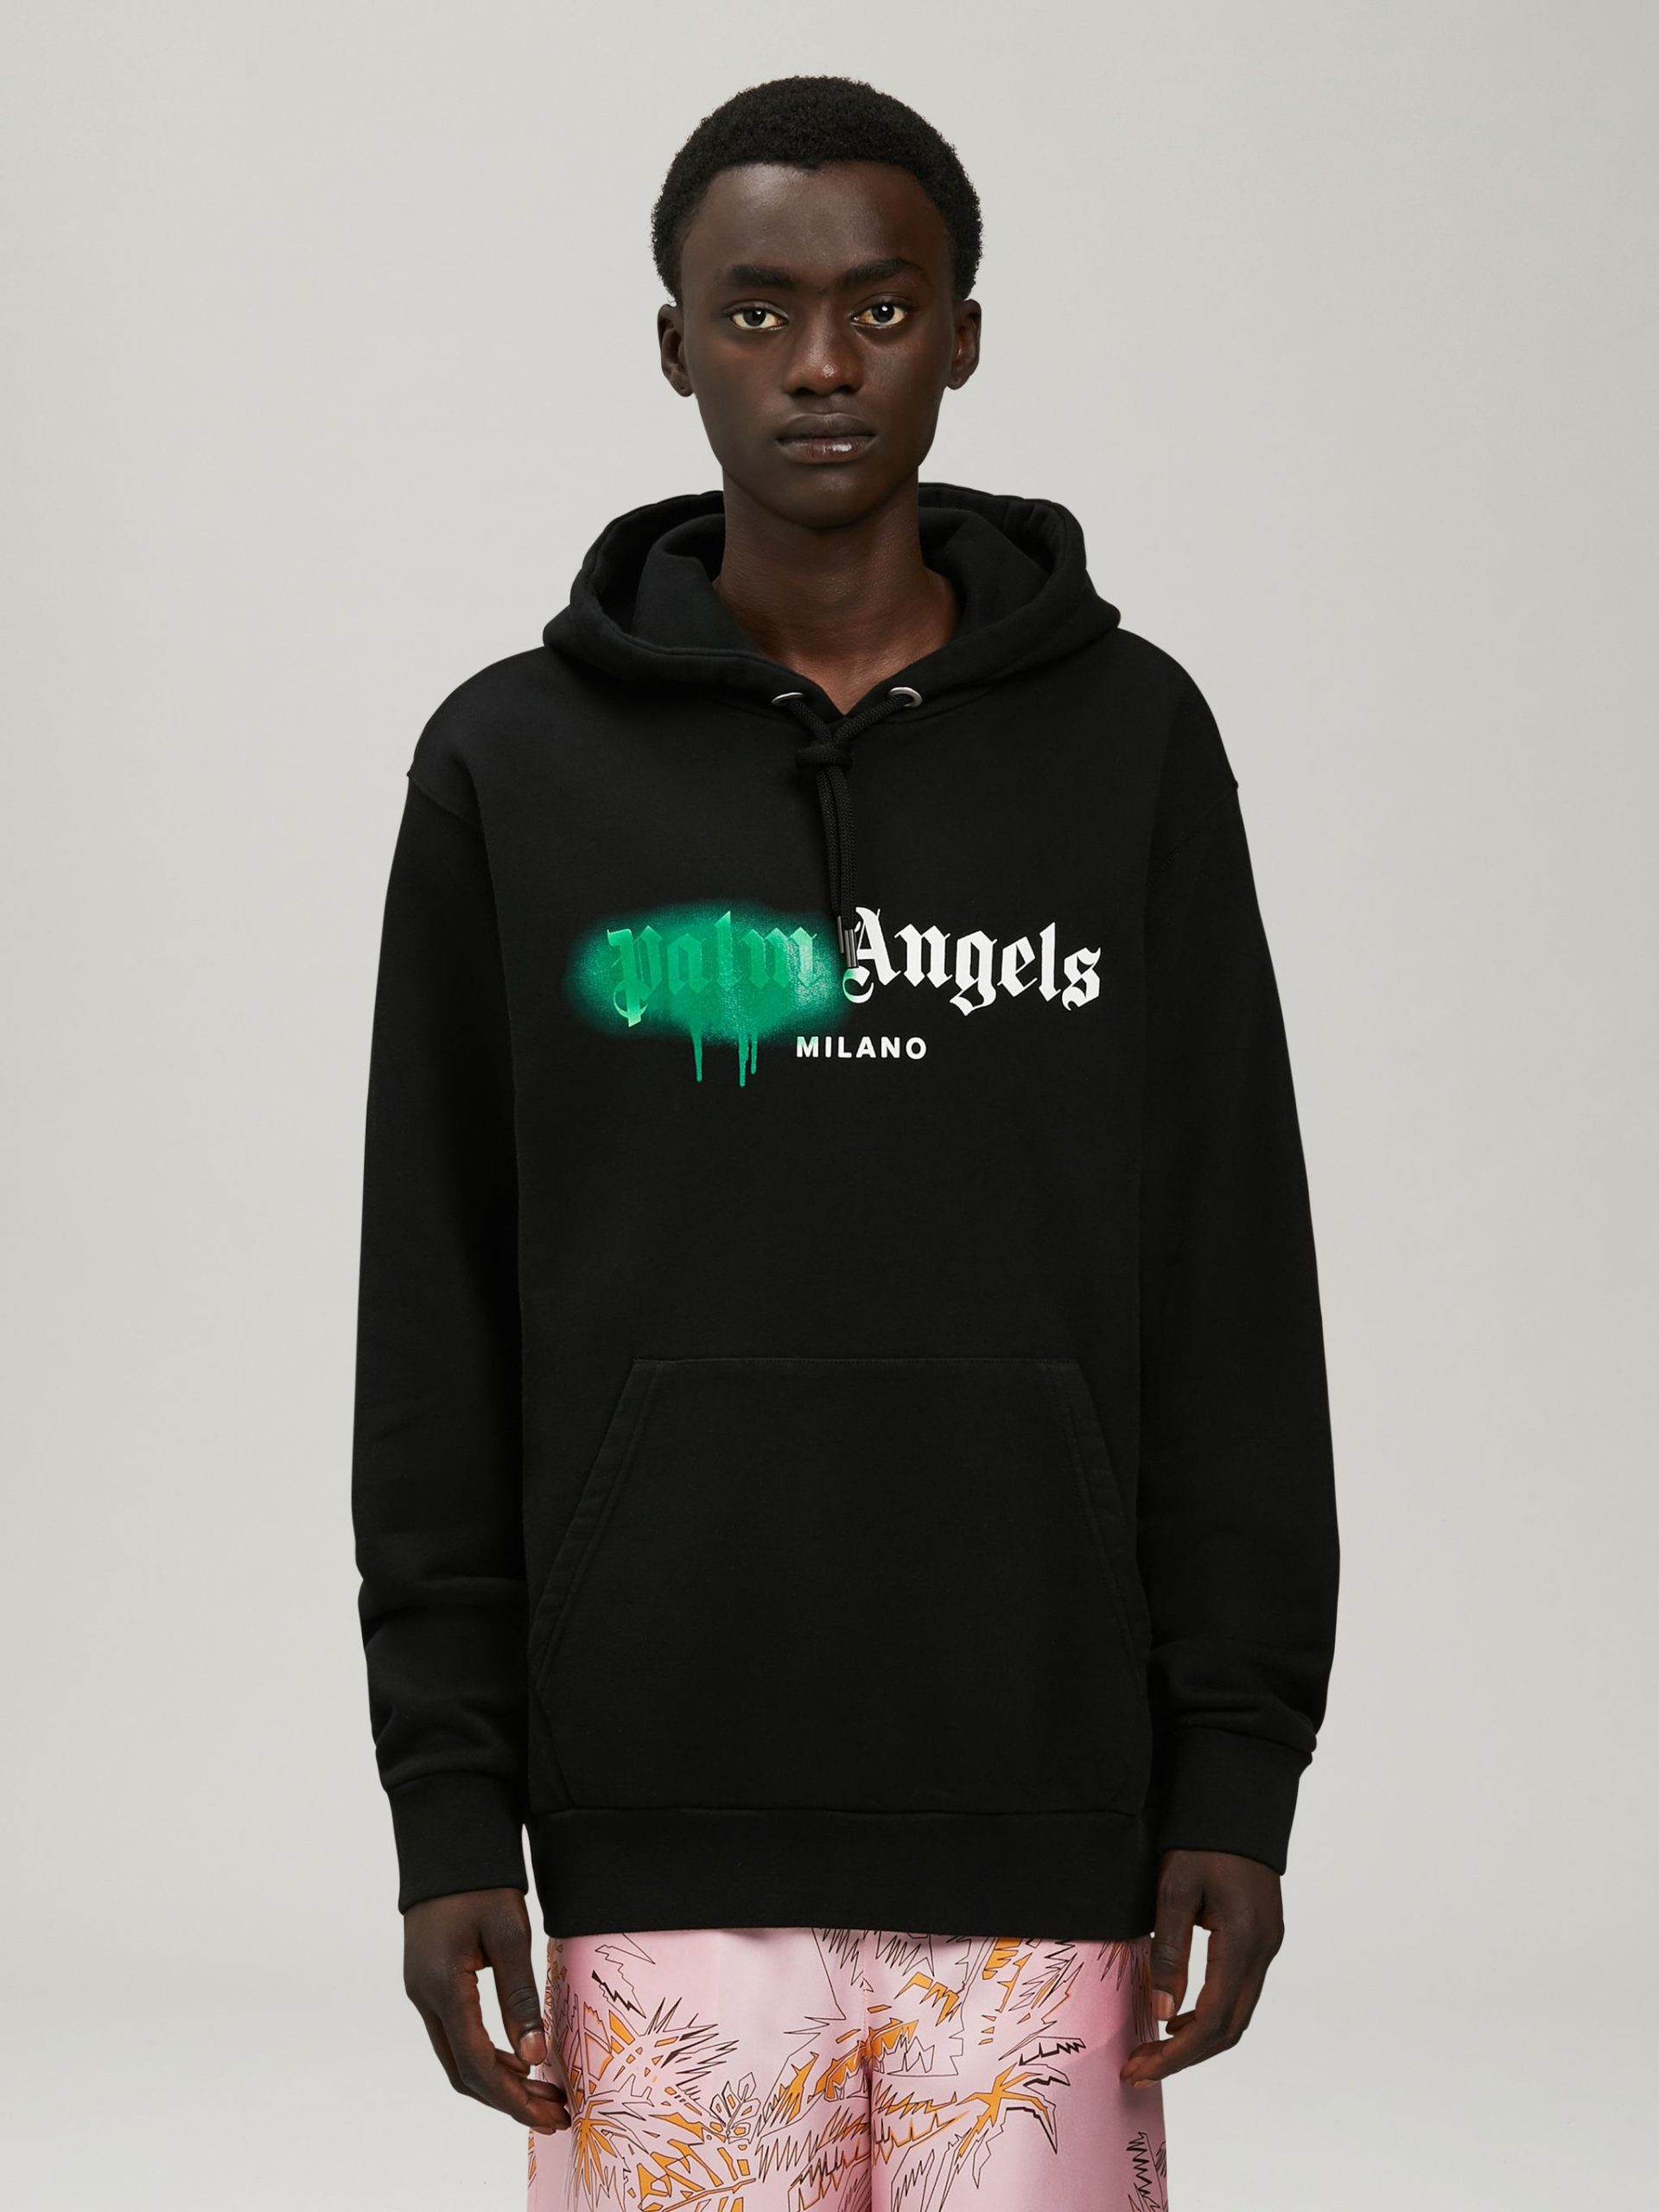 Palm Angels Clothing Review